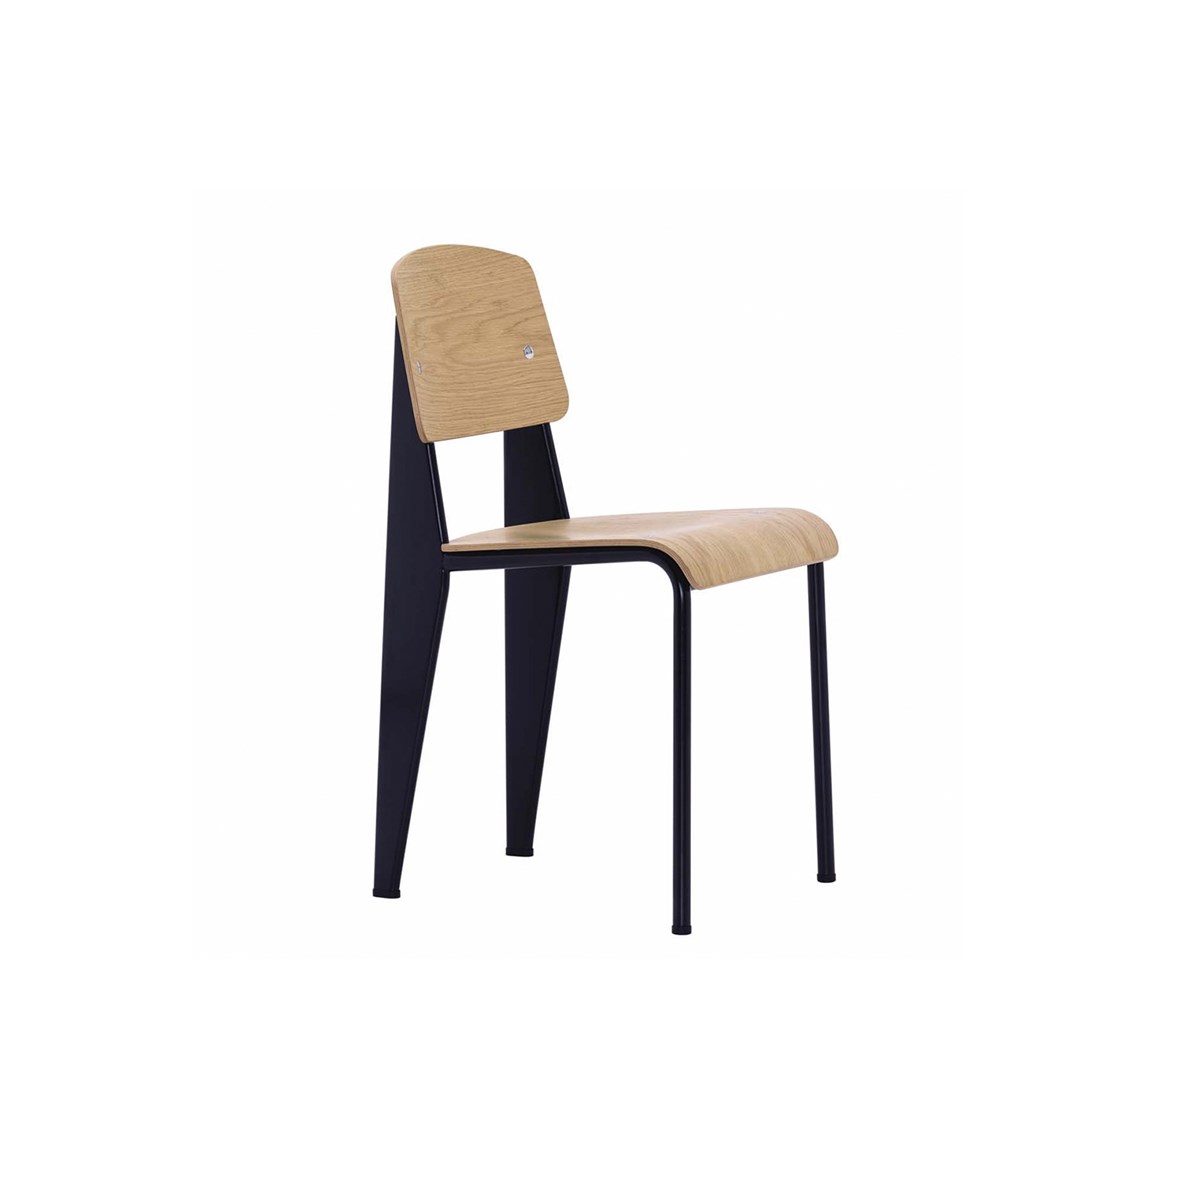 Vitra-Jean-Prouve-Standard-Chair-Matisse-1